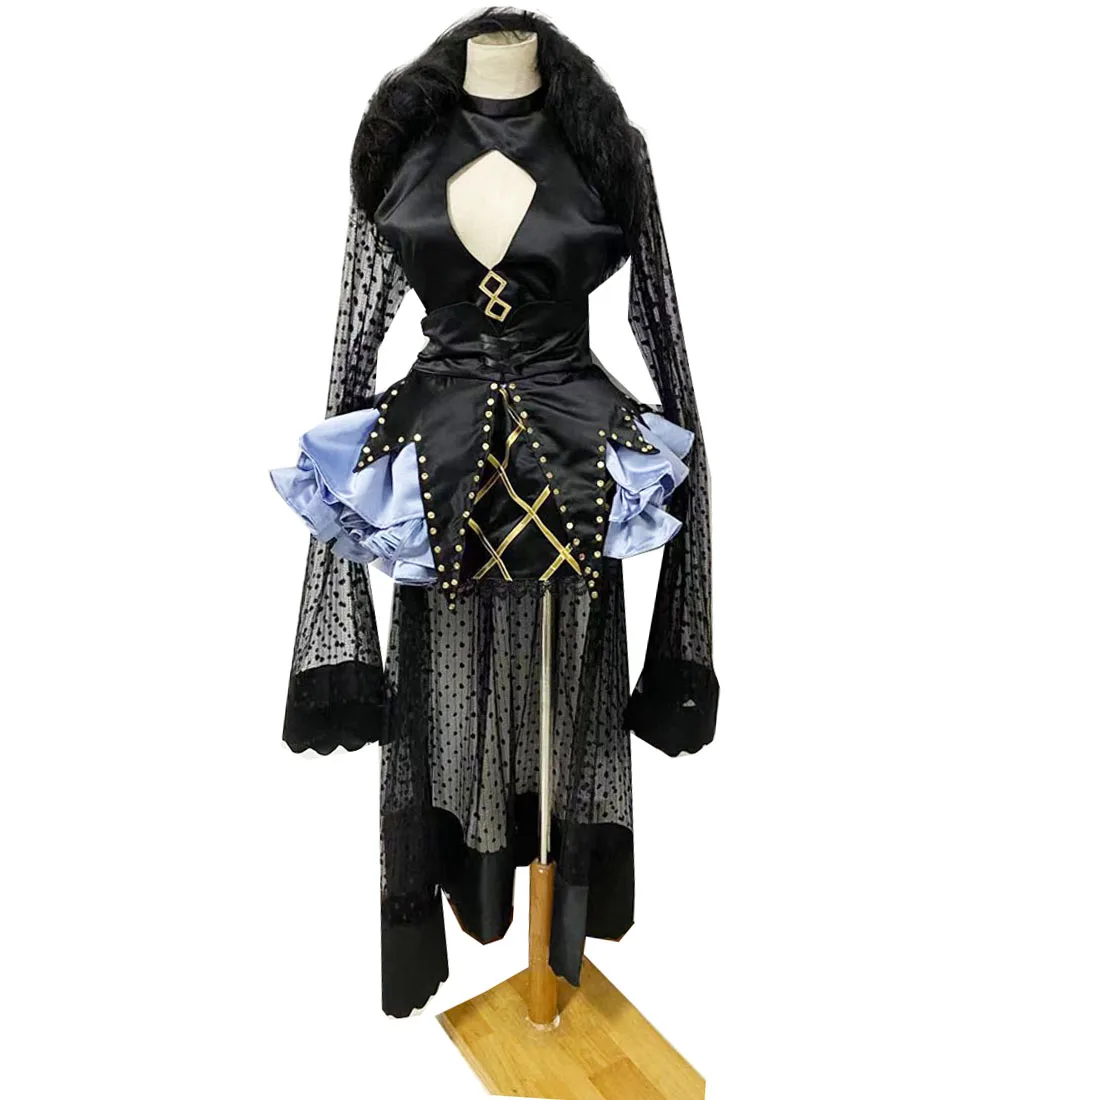 

2021 Fate Grand Order FGO The Sixth Christmas-Themed Activity Vritra Evening Dress Uniform Cosplay Costume